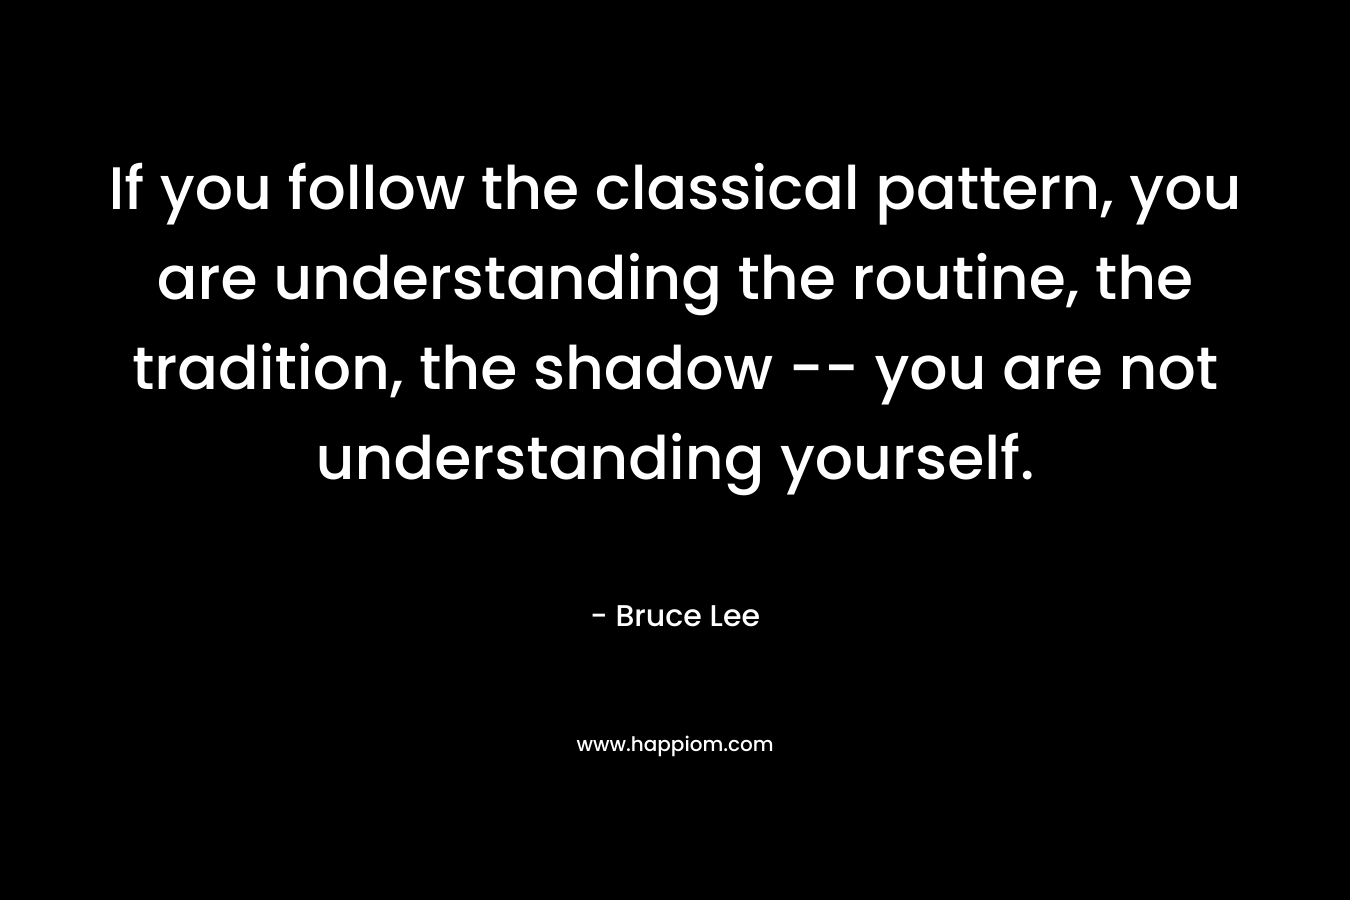 If you follow the classical pattern, you are understanding the routine, the tradition, the shadow — you are not understanding yourself. – Bruce Lee